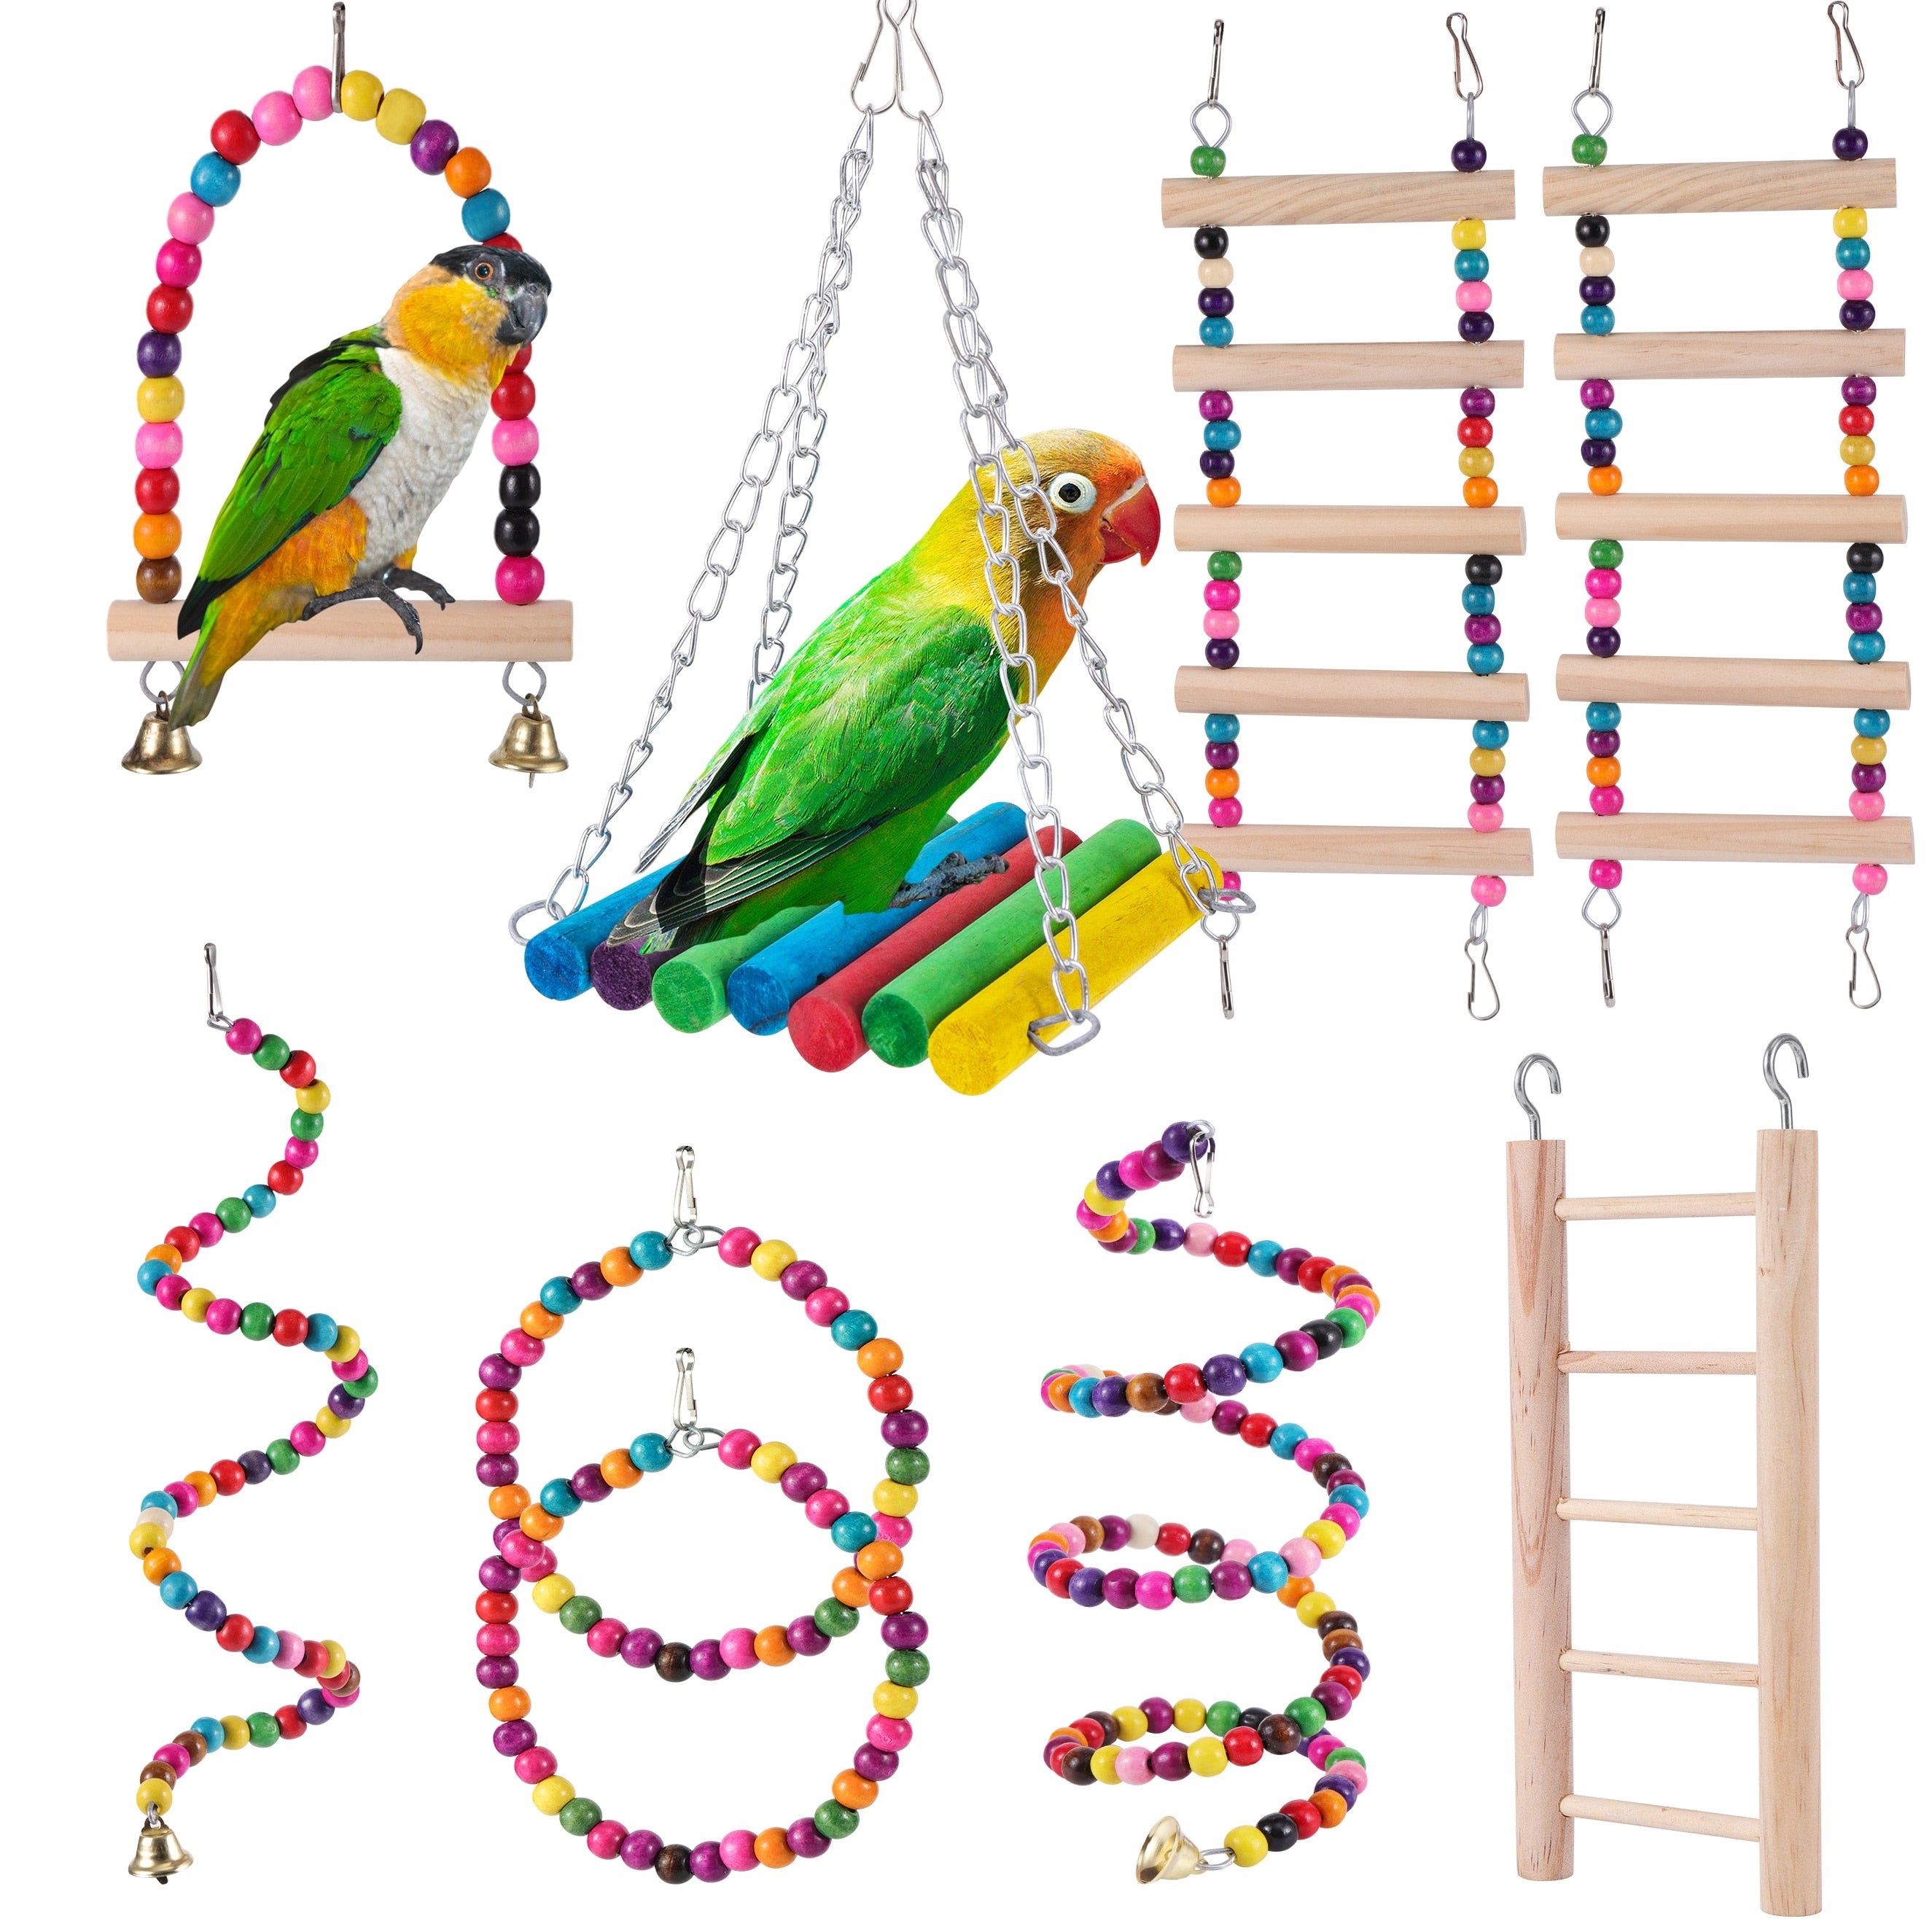 Pet Bird Toy Swings Chewing Training Toys Small Parrot Hanging Hammock Parrot Cage Bell Perch Toys with Ladder Pet Supplies 1pc